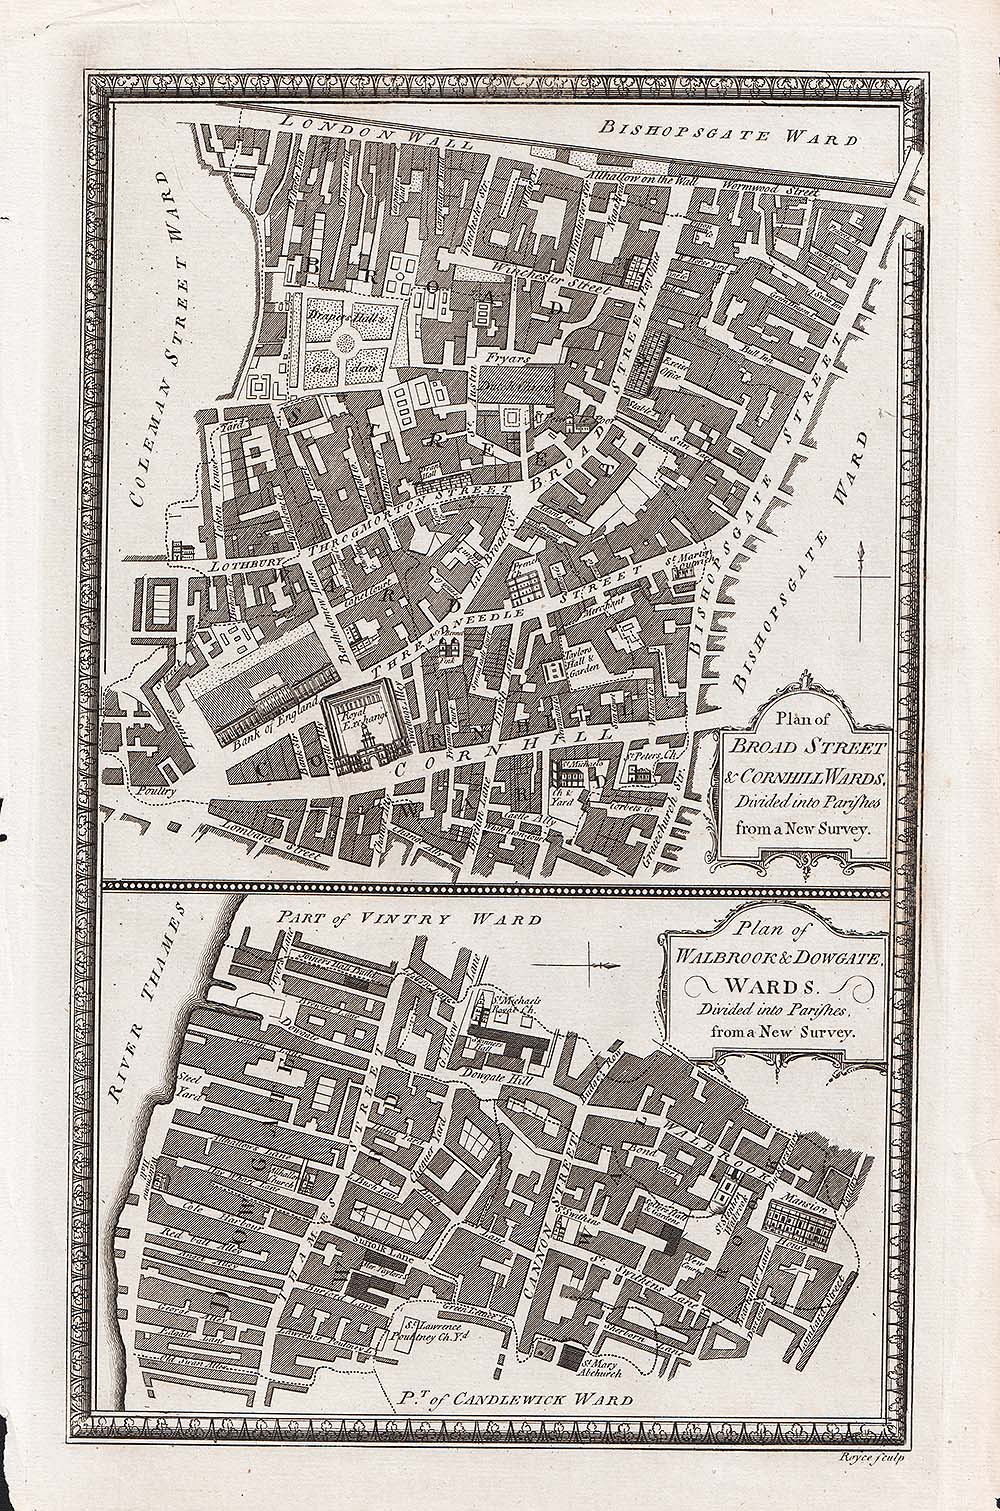 Plans of Broad Street & Cornhill Wards and Walbrook & Dowgate Wards